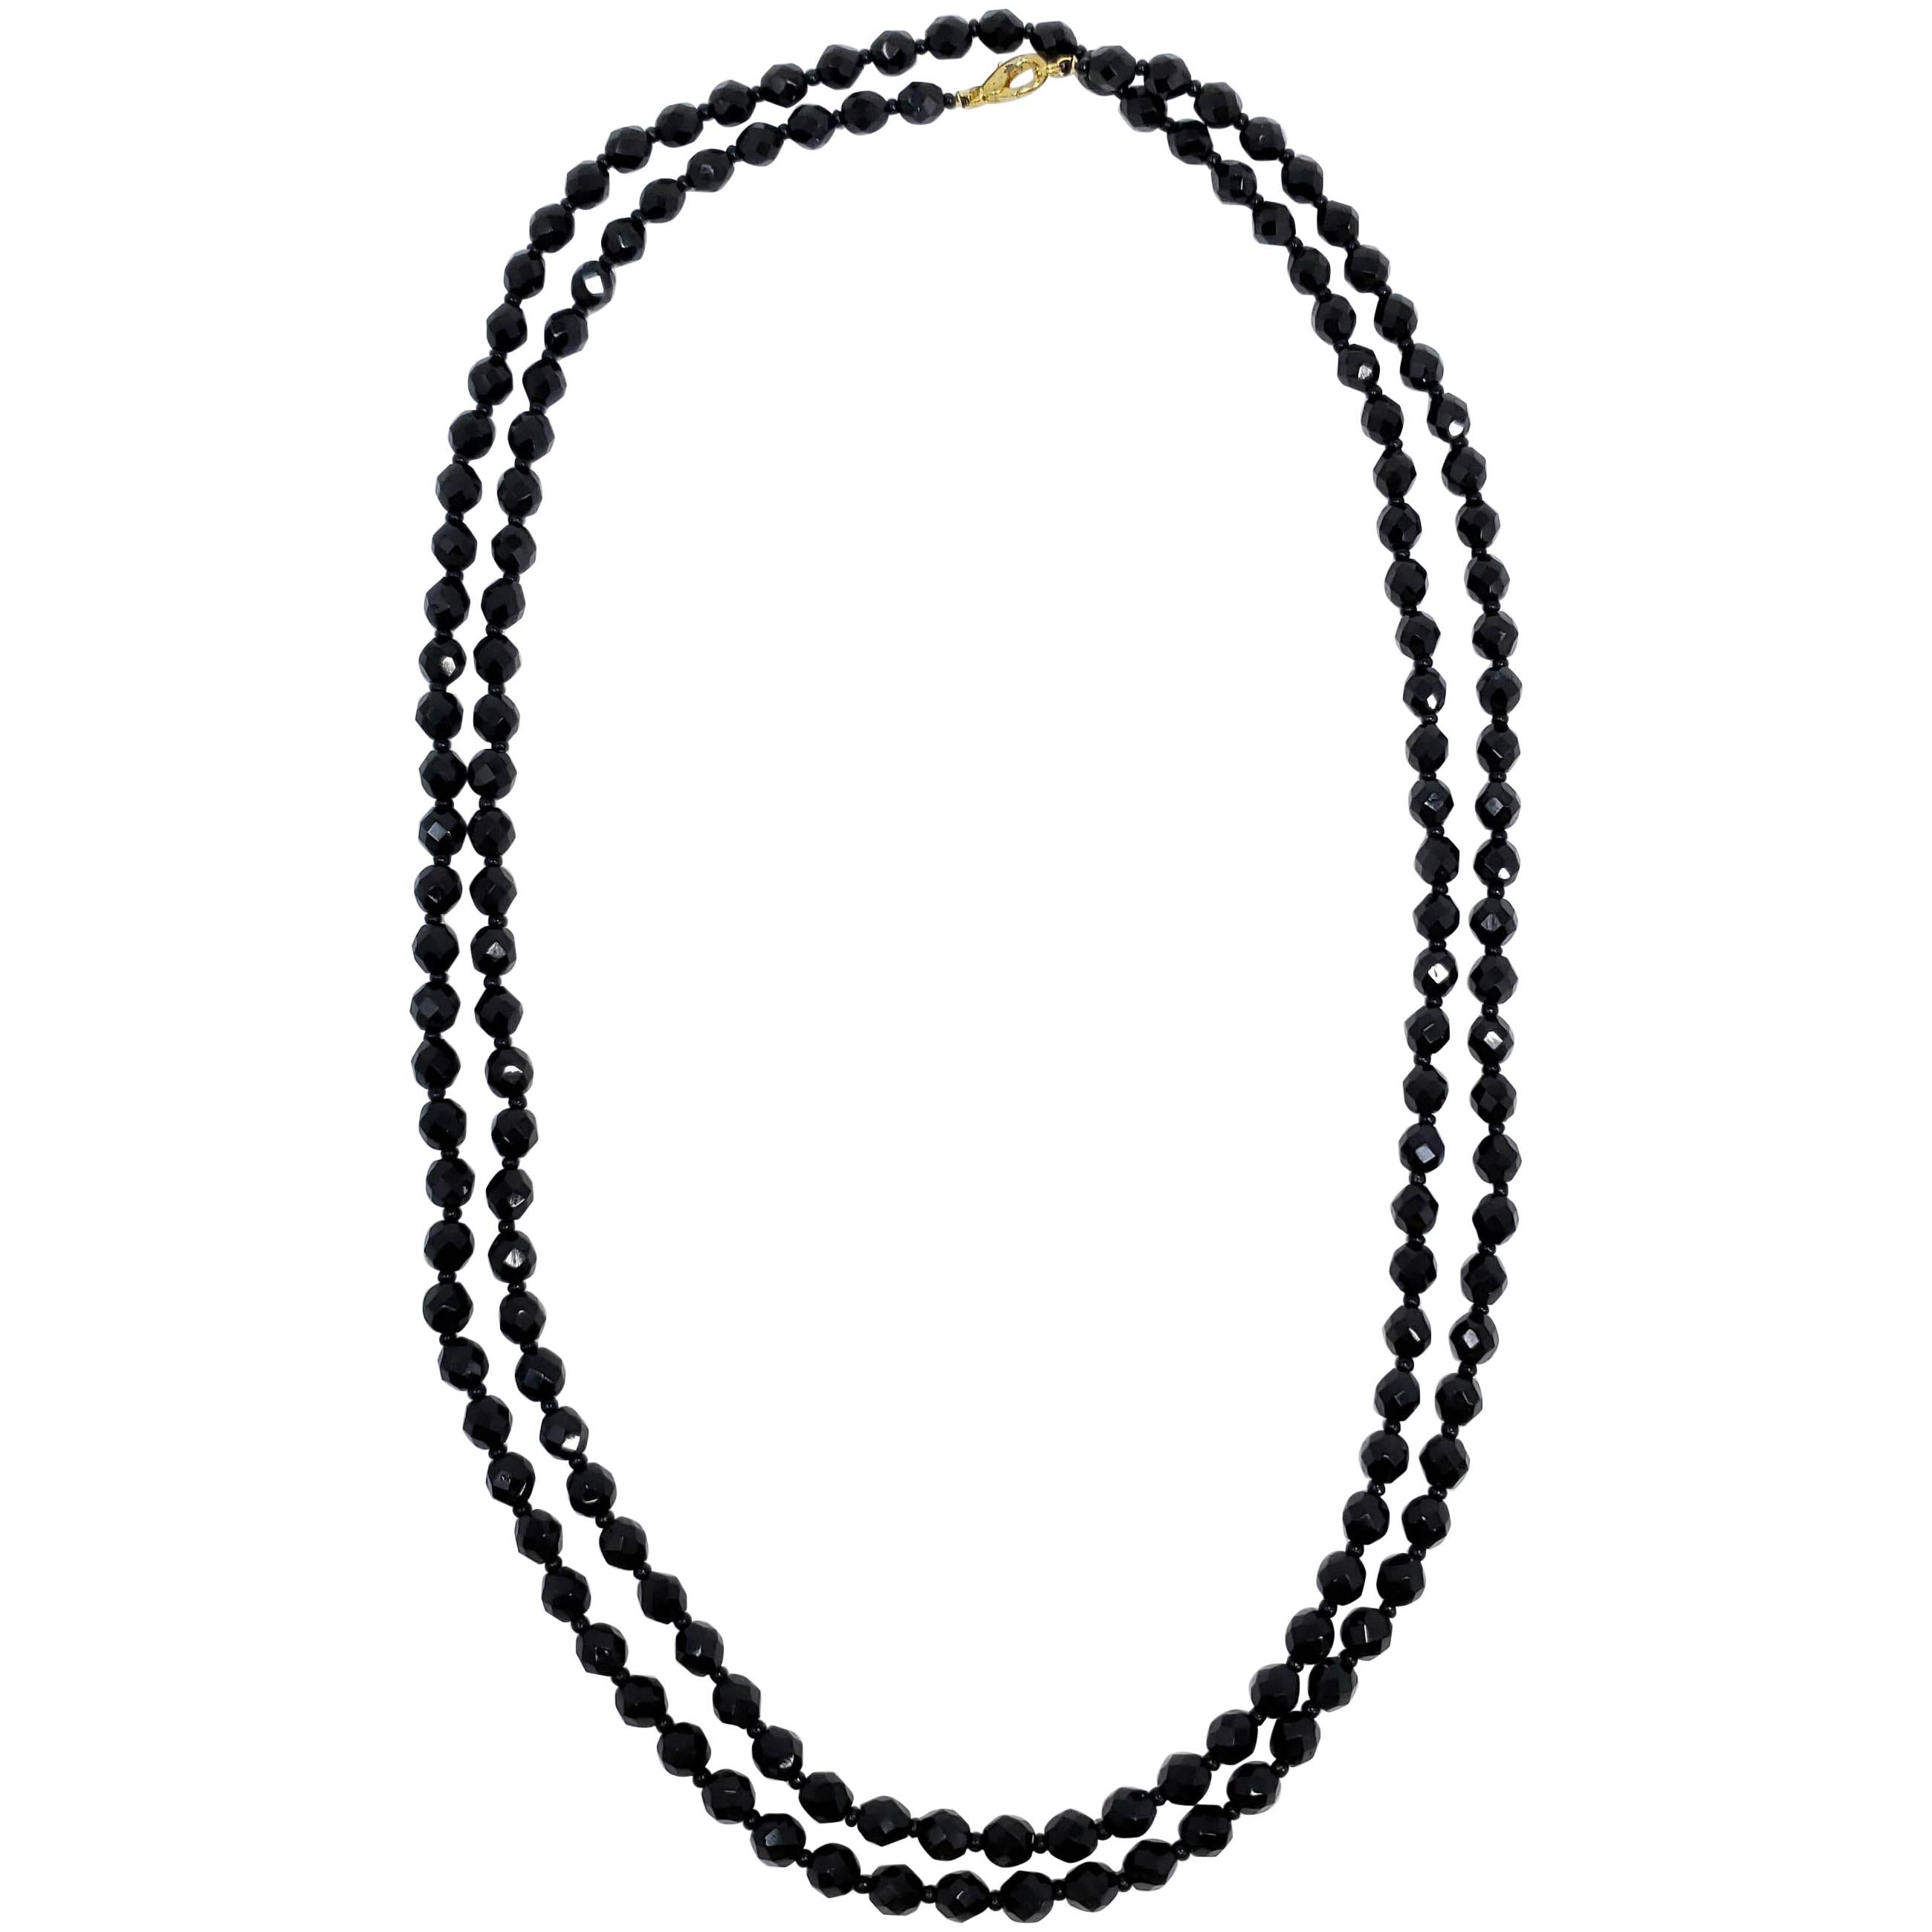 60" Black Czechoslovakian Jet Faceted Crystal Bead Long Rope Necklace, Mid 1900s